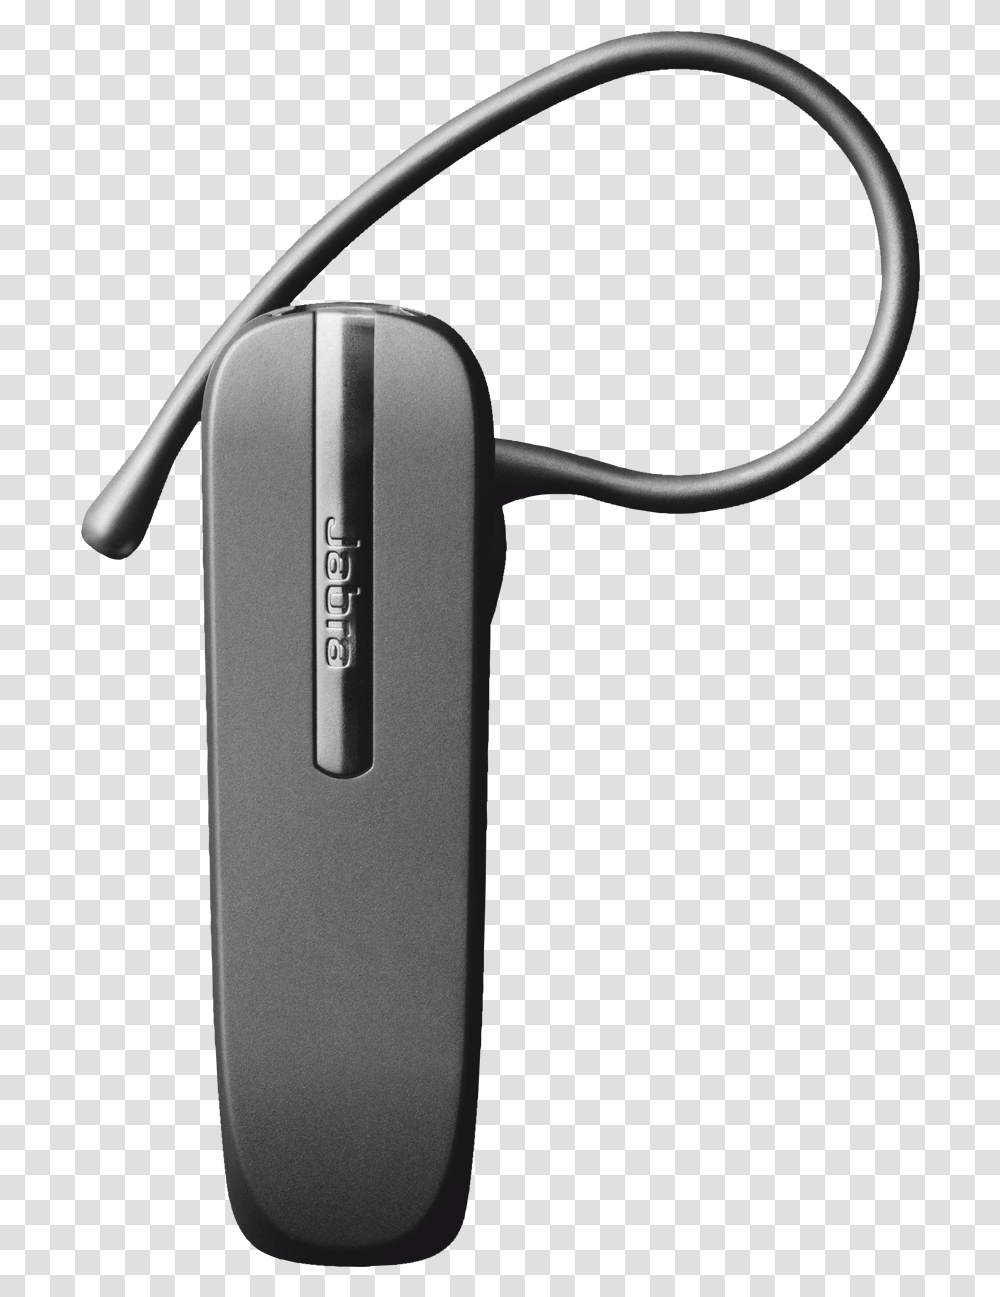 Jabra Bt2047 Bluetooth Headset For Mobile Devices Bluetooth Headphones Low Price, Adapter, Electronics, Hardware, Modem Transparent Png